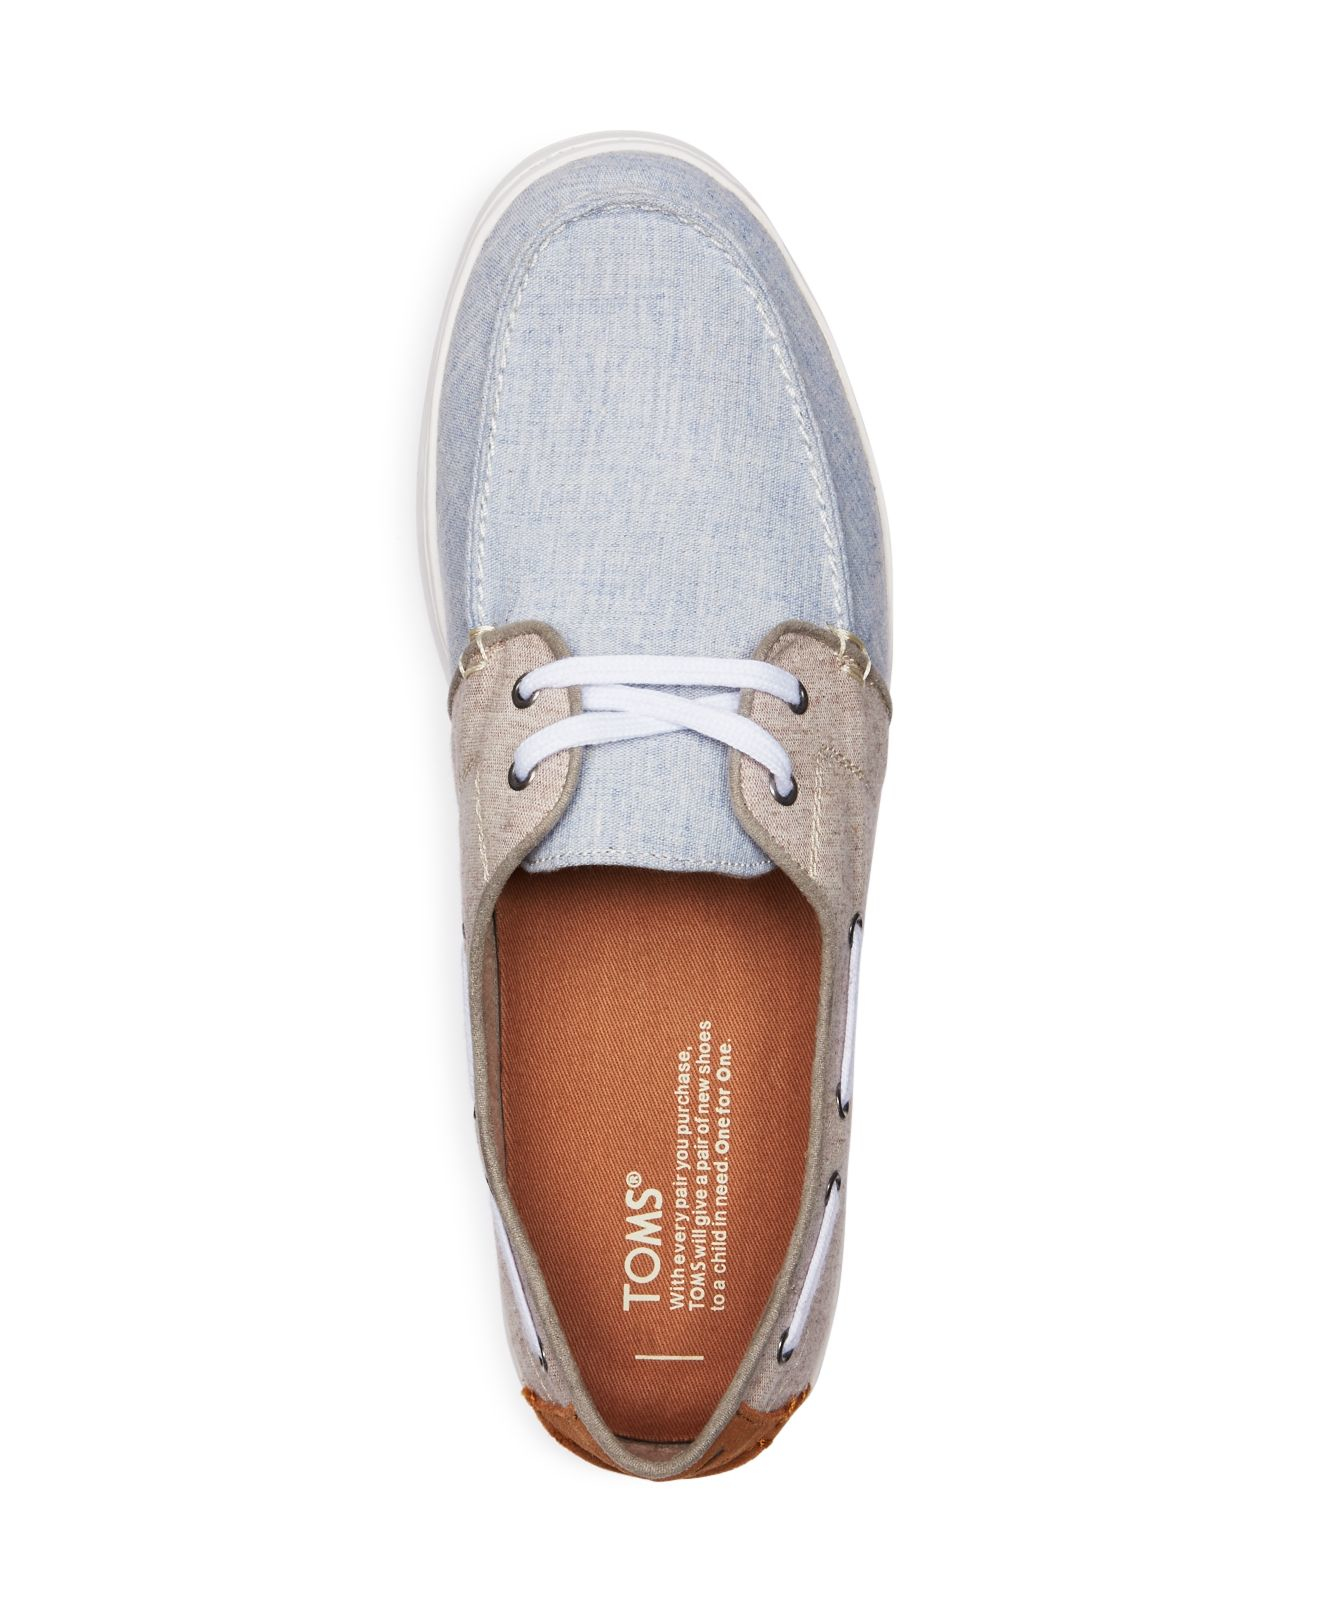 sperry men's h2o skiff boat shoes